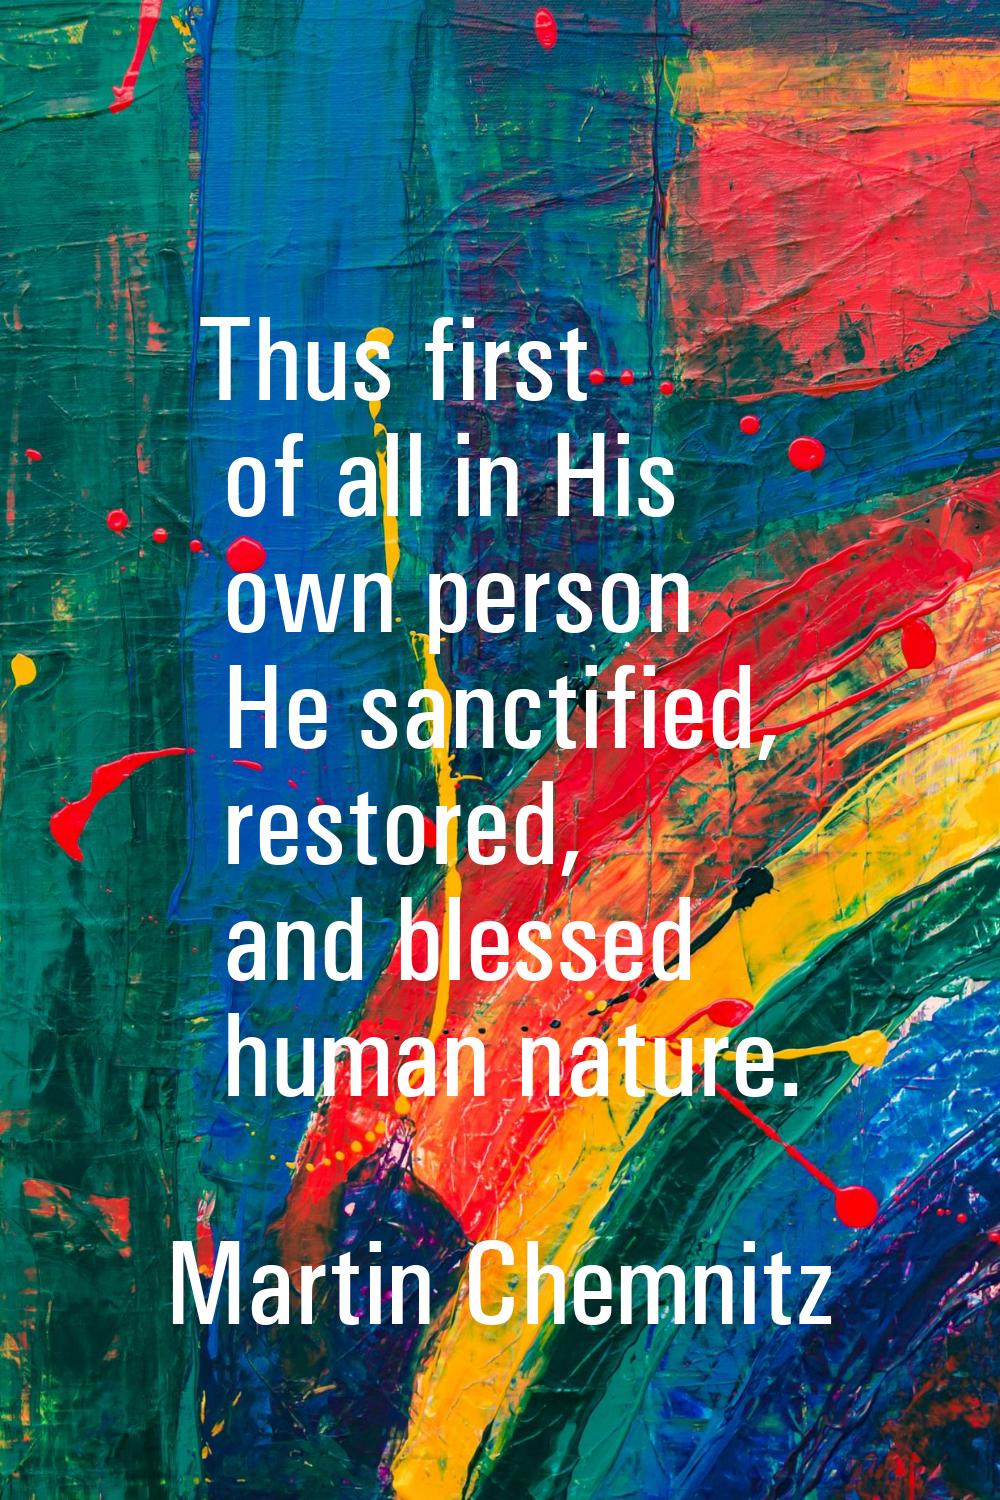 Thus first of all in His own person He sanctified, restored, and blessed human nature.